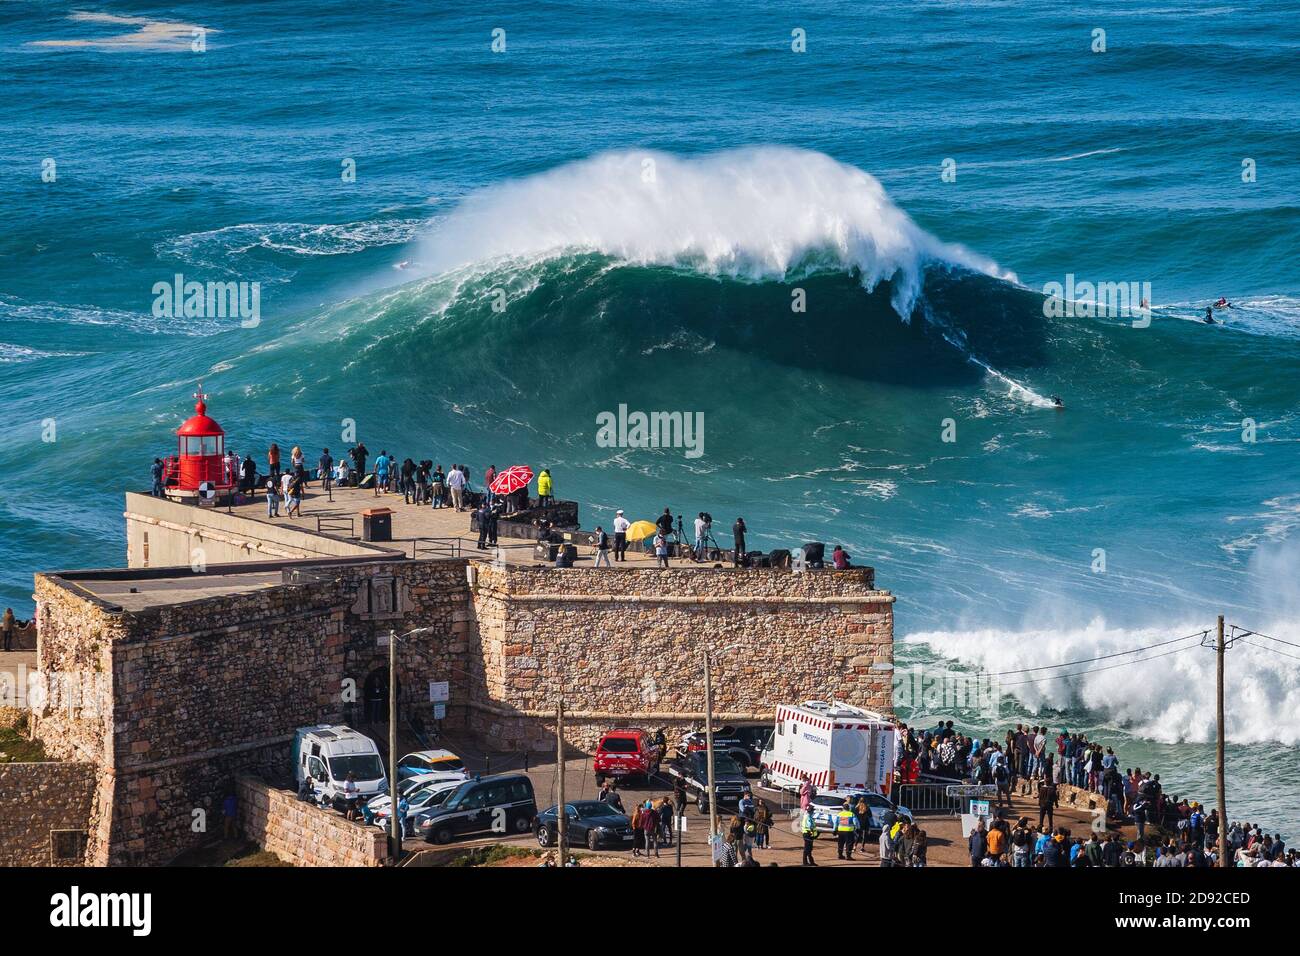 Surfer riding huge wave near the lighthouse in Nazare, Portugal. Nazare is famously known to surfers for having the biggest waves in the world. Stock Photo